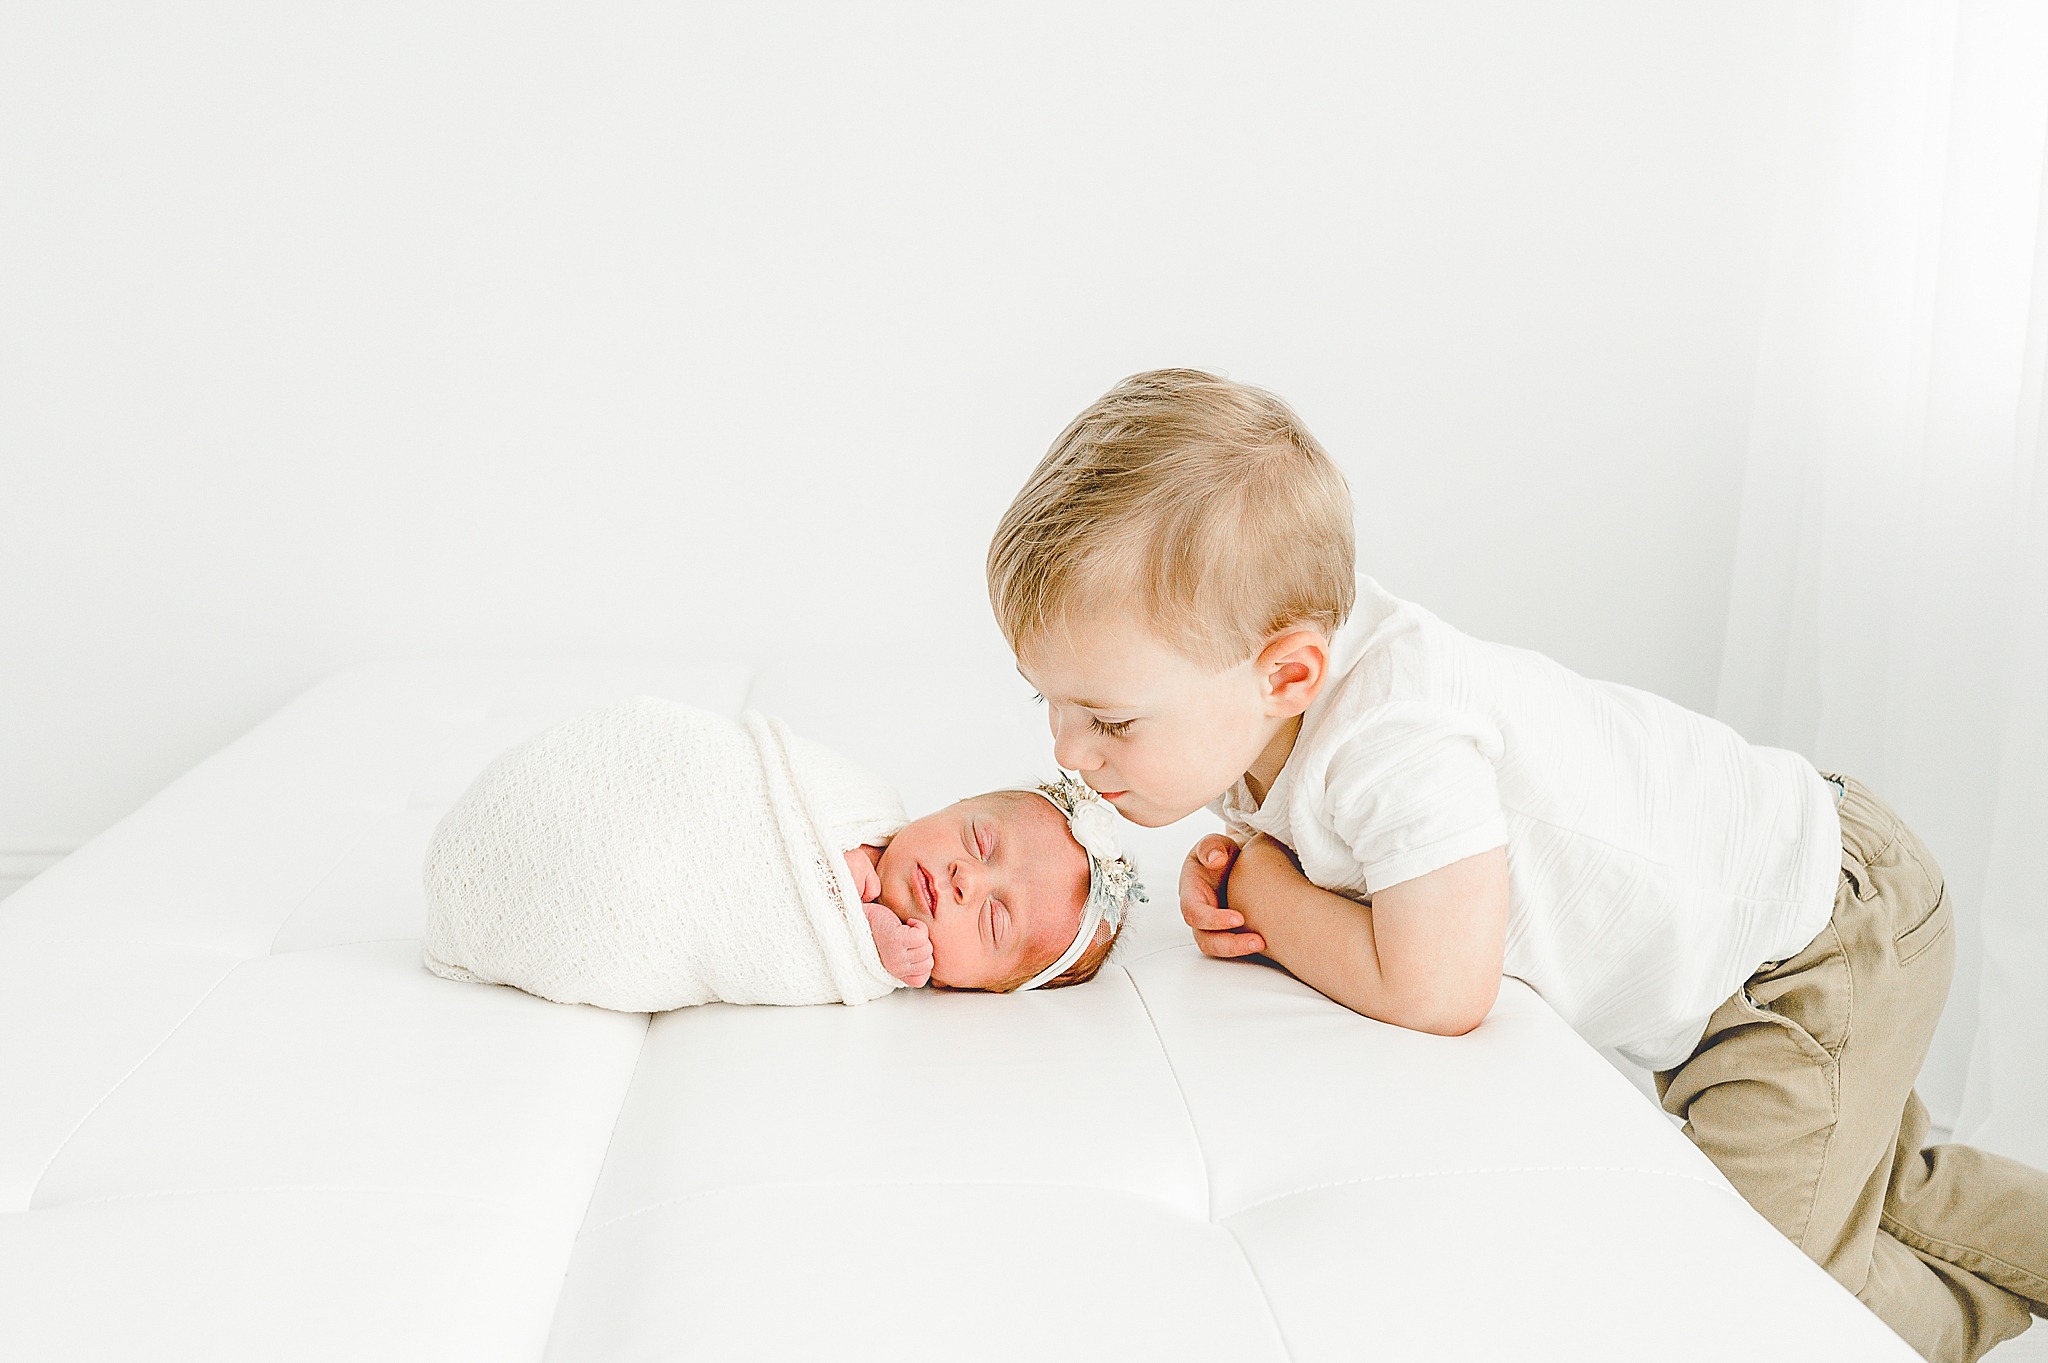 Newborn Session with Nora | Family of Four in the Studio